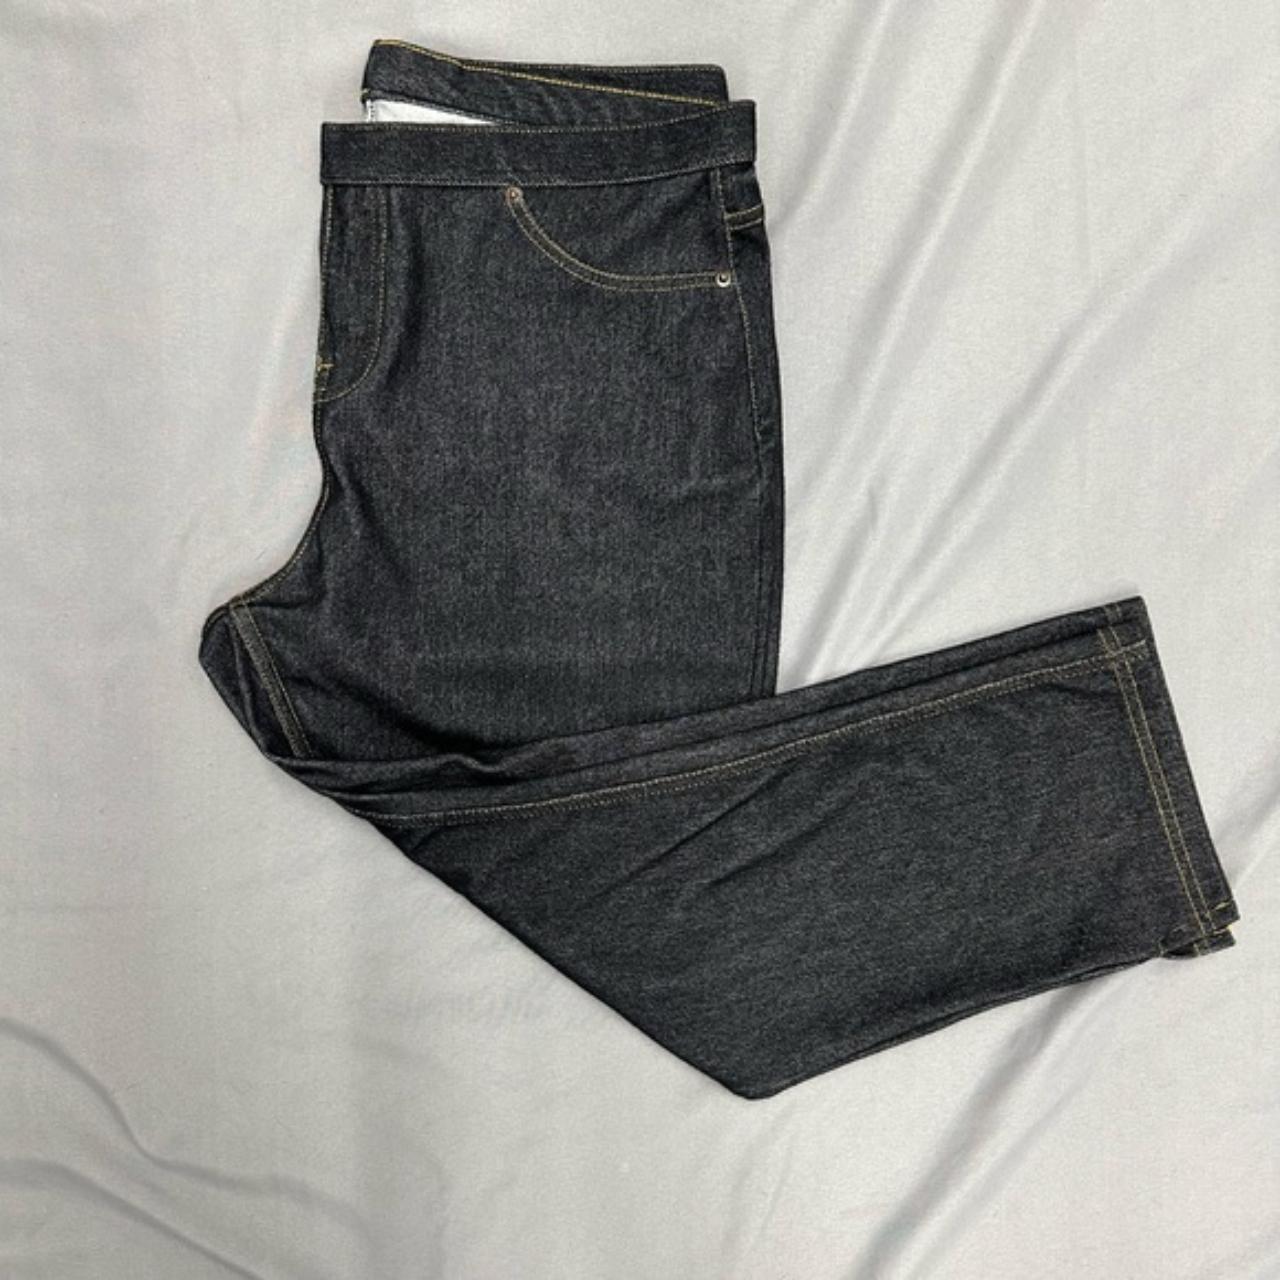 Simply Vera Wang jeggings in great condition. - Depop